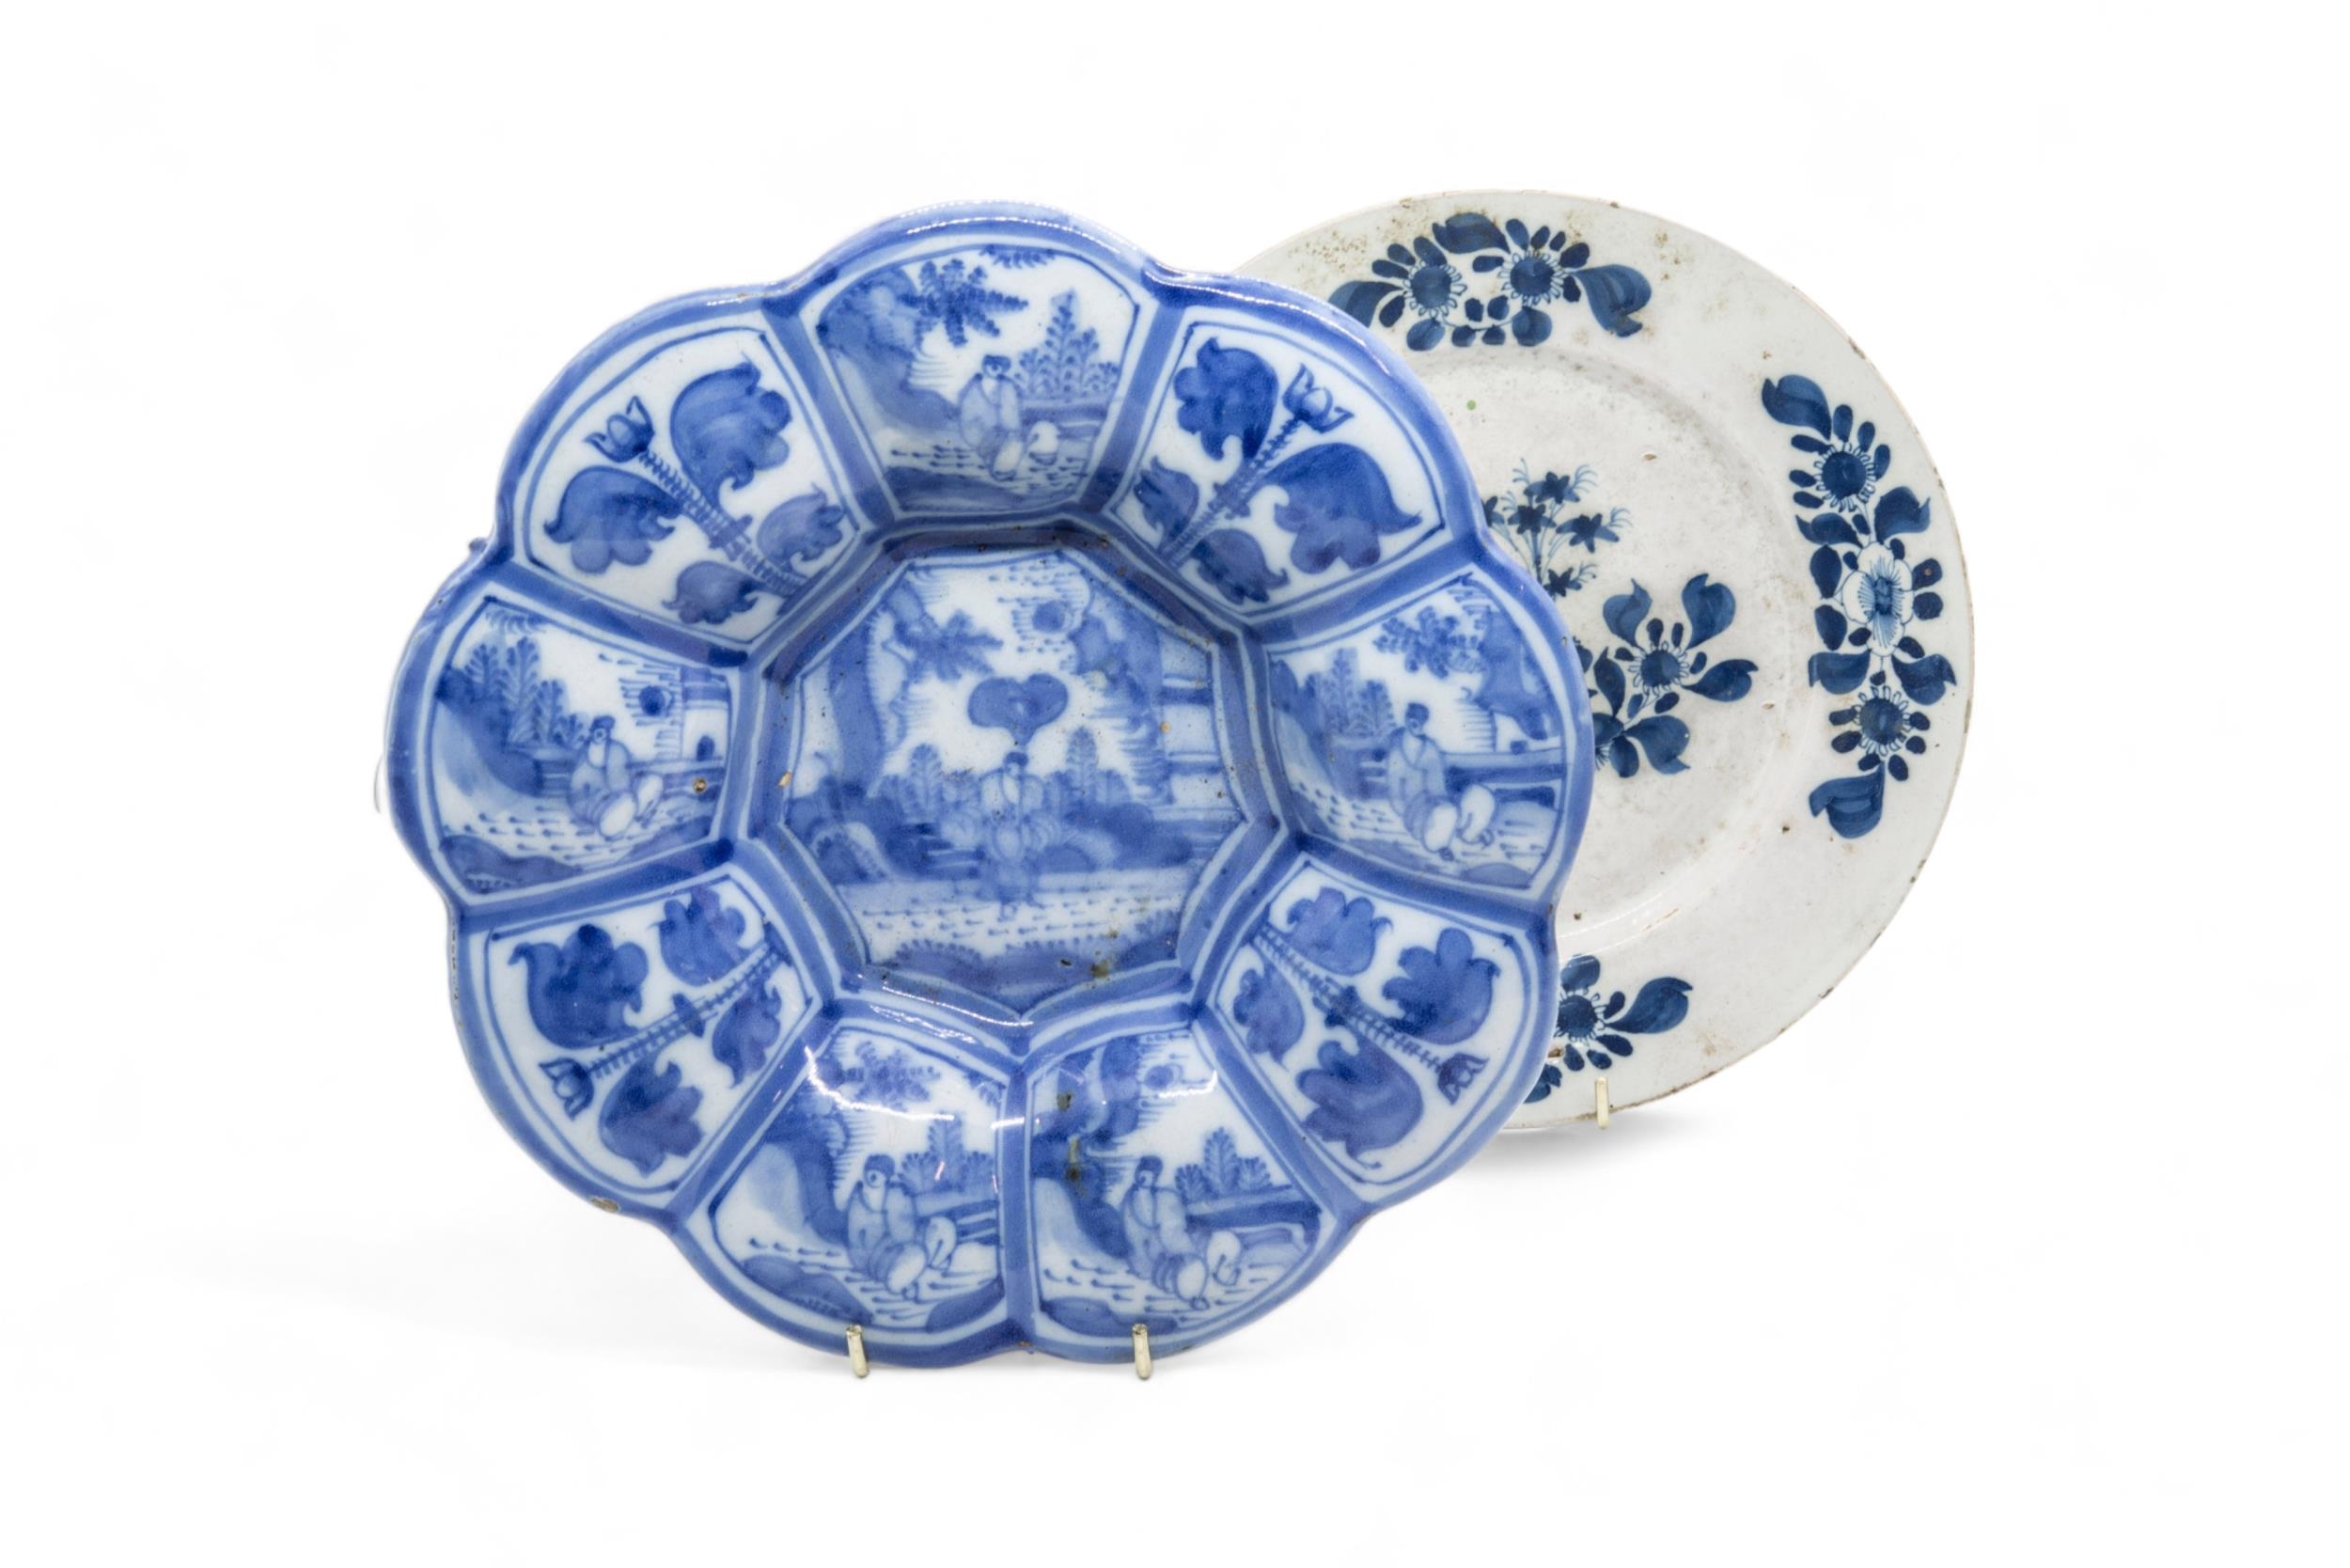 A LATE 17TH / 18TH CENTURY LOBED FAIENCE DISH Together with seven 18th century delft plates, 25cms - Image 5 of 6